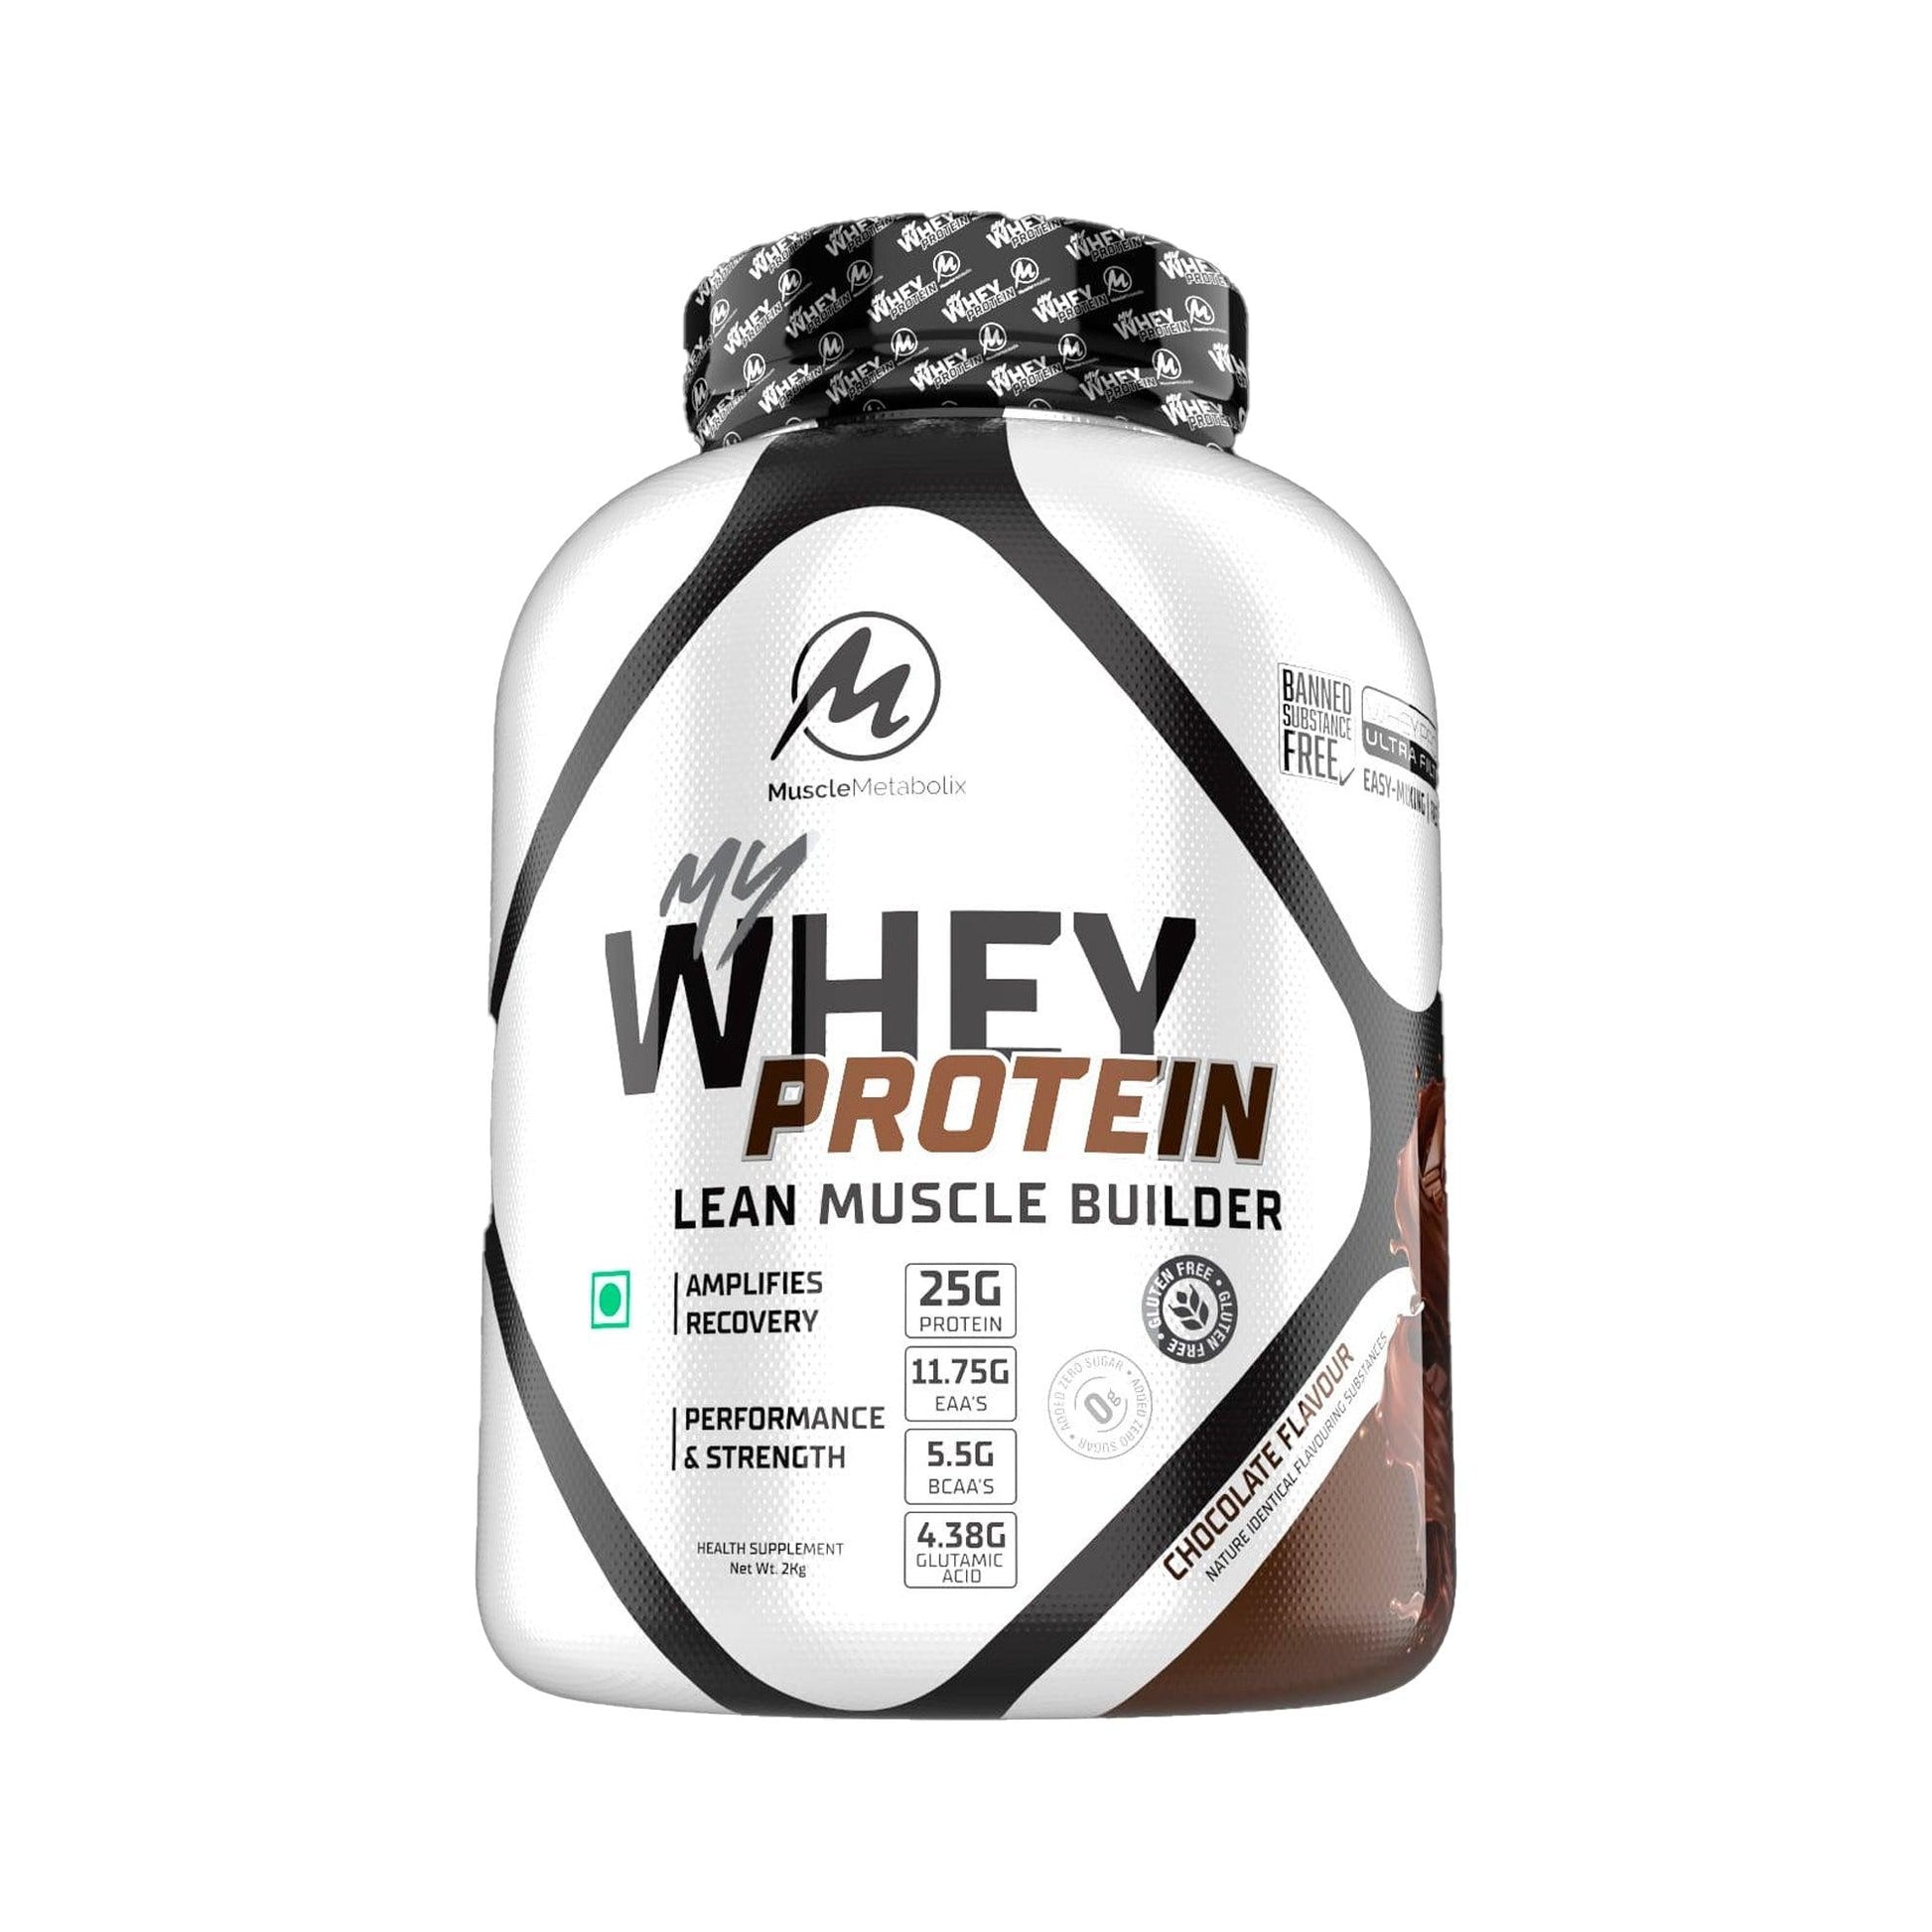 Muscle Metabolix My Whey Protein 2kg (Coffee Caramel) Lean Muscle Builder - The Muscle Kart.com